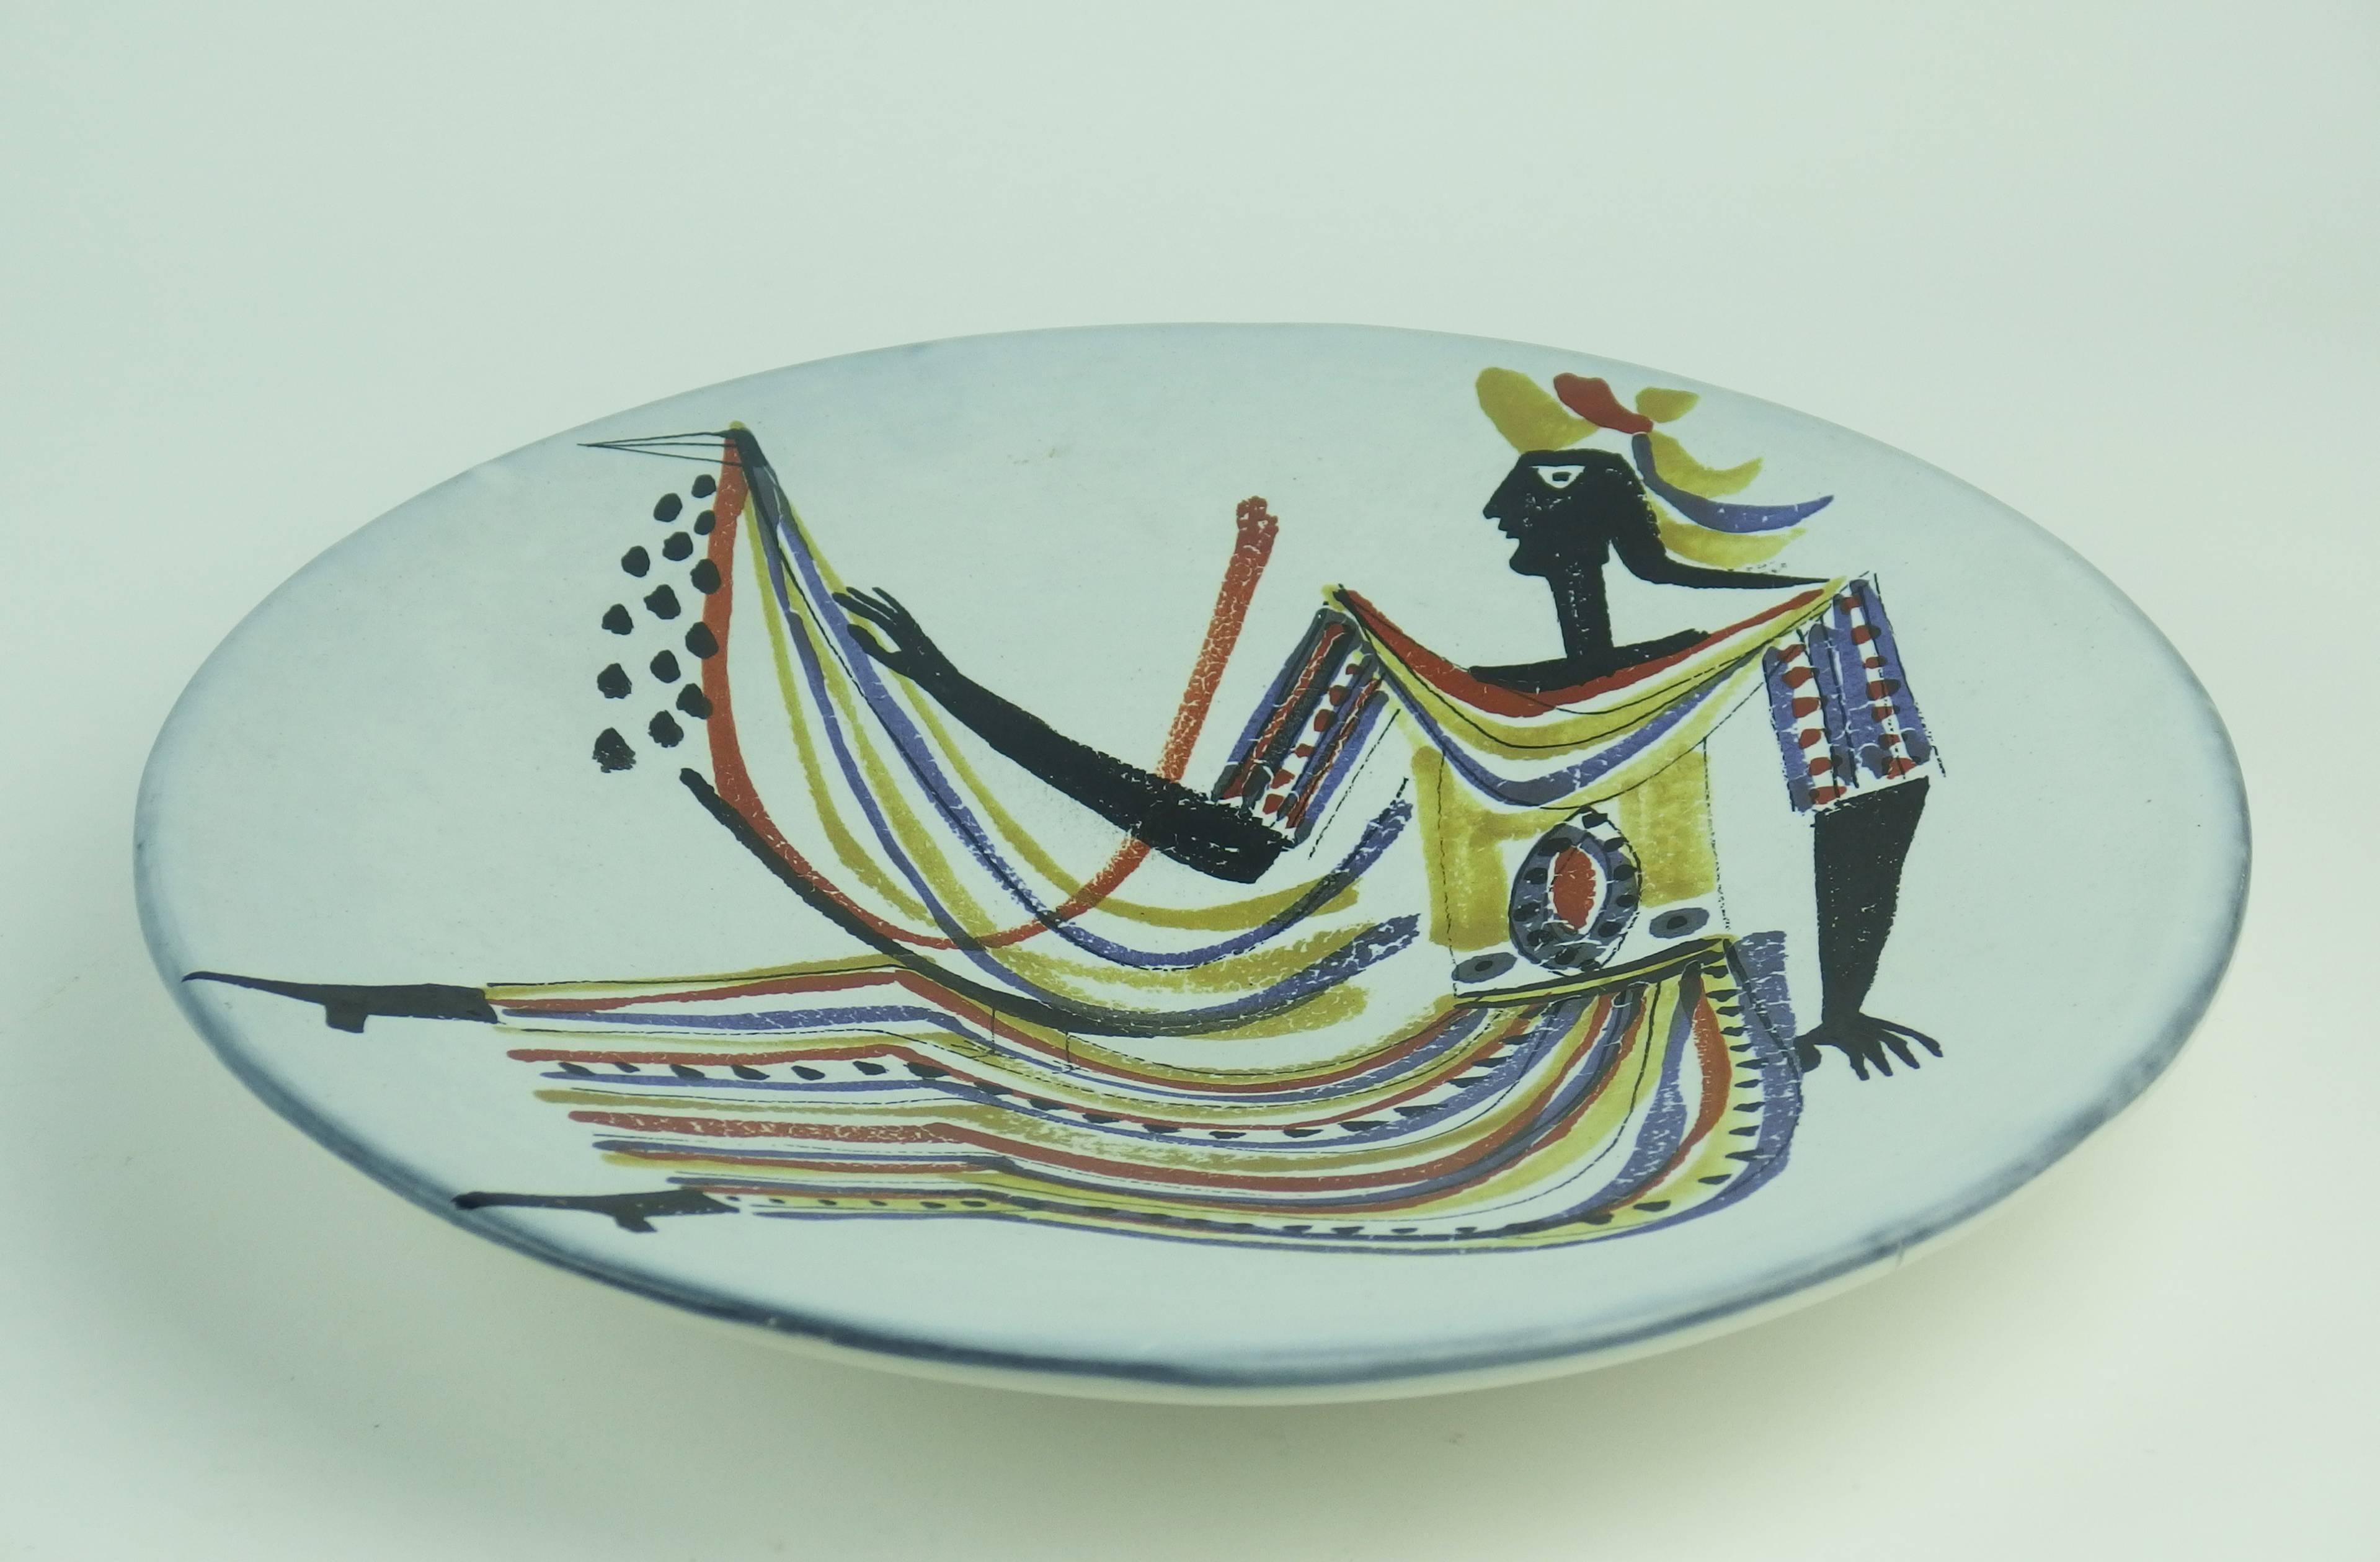 A decorative plate with a modern figurative design. Signed Capron Vallauris